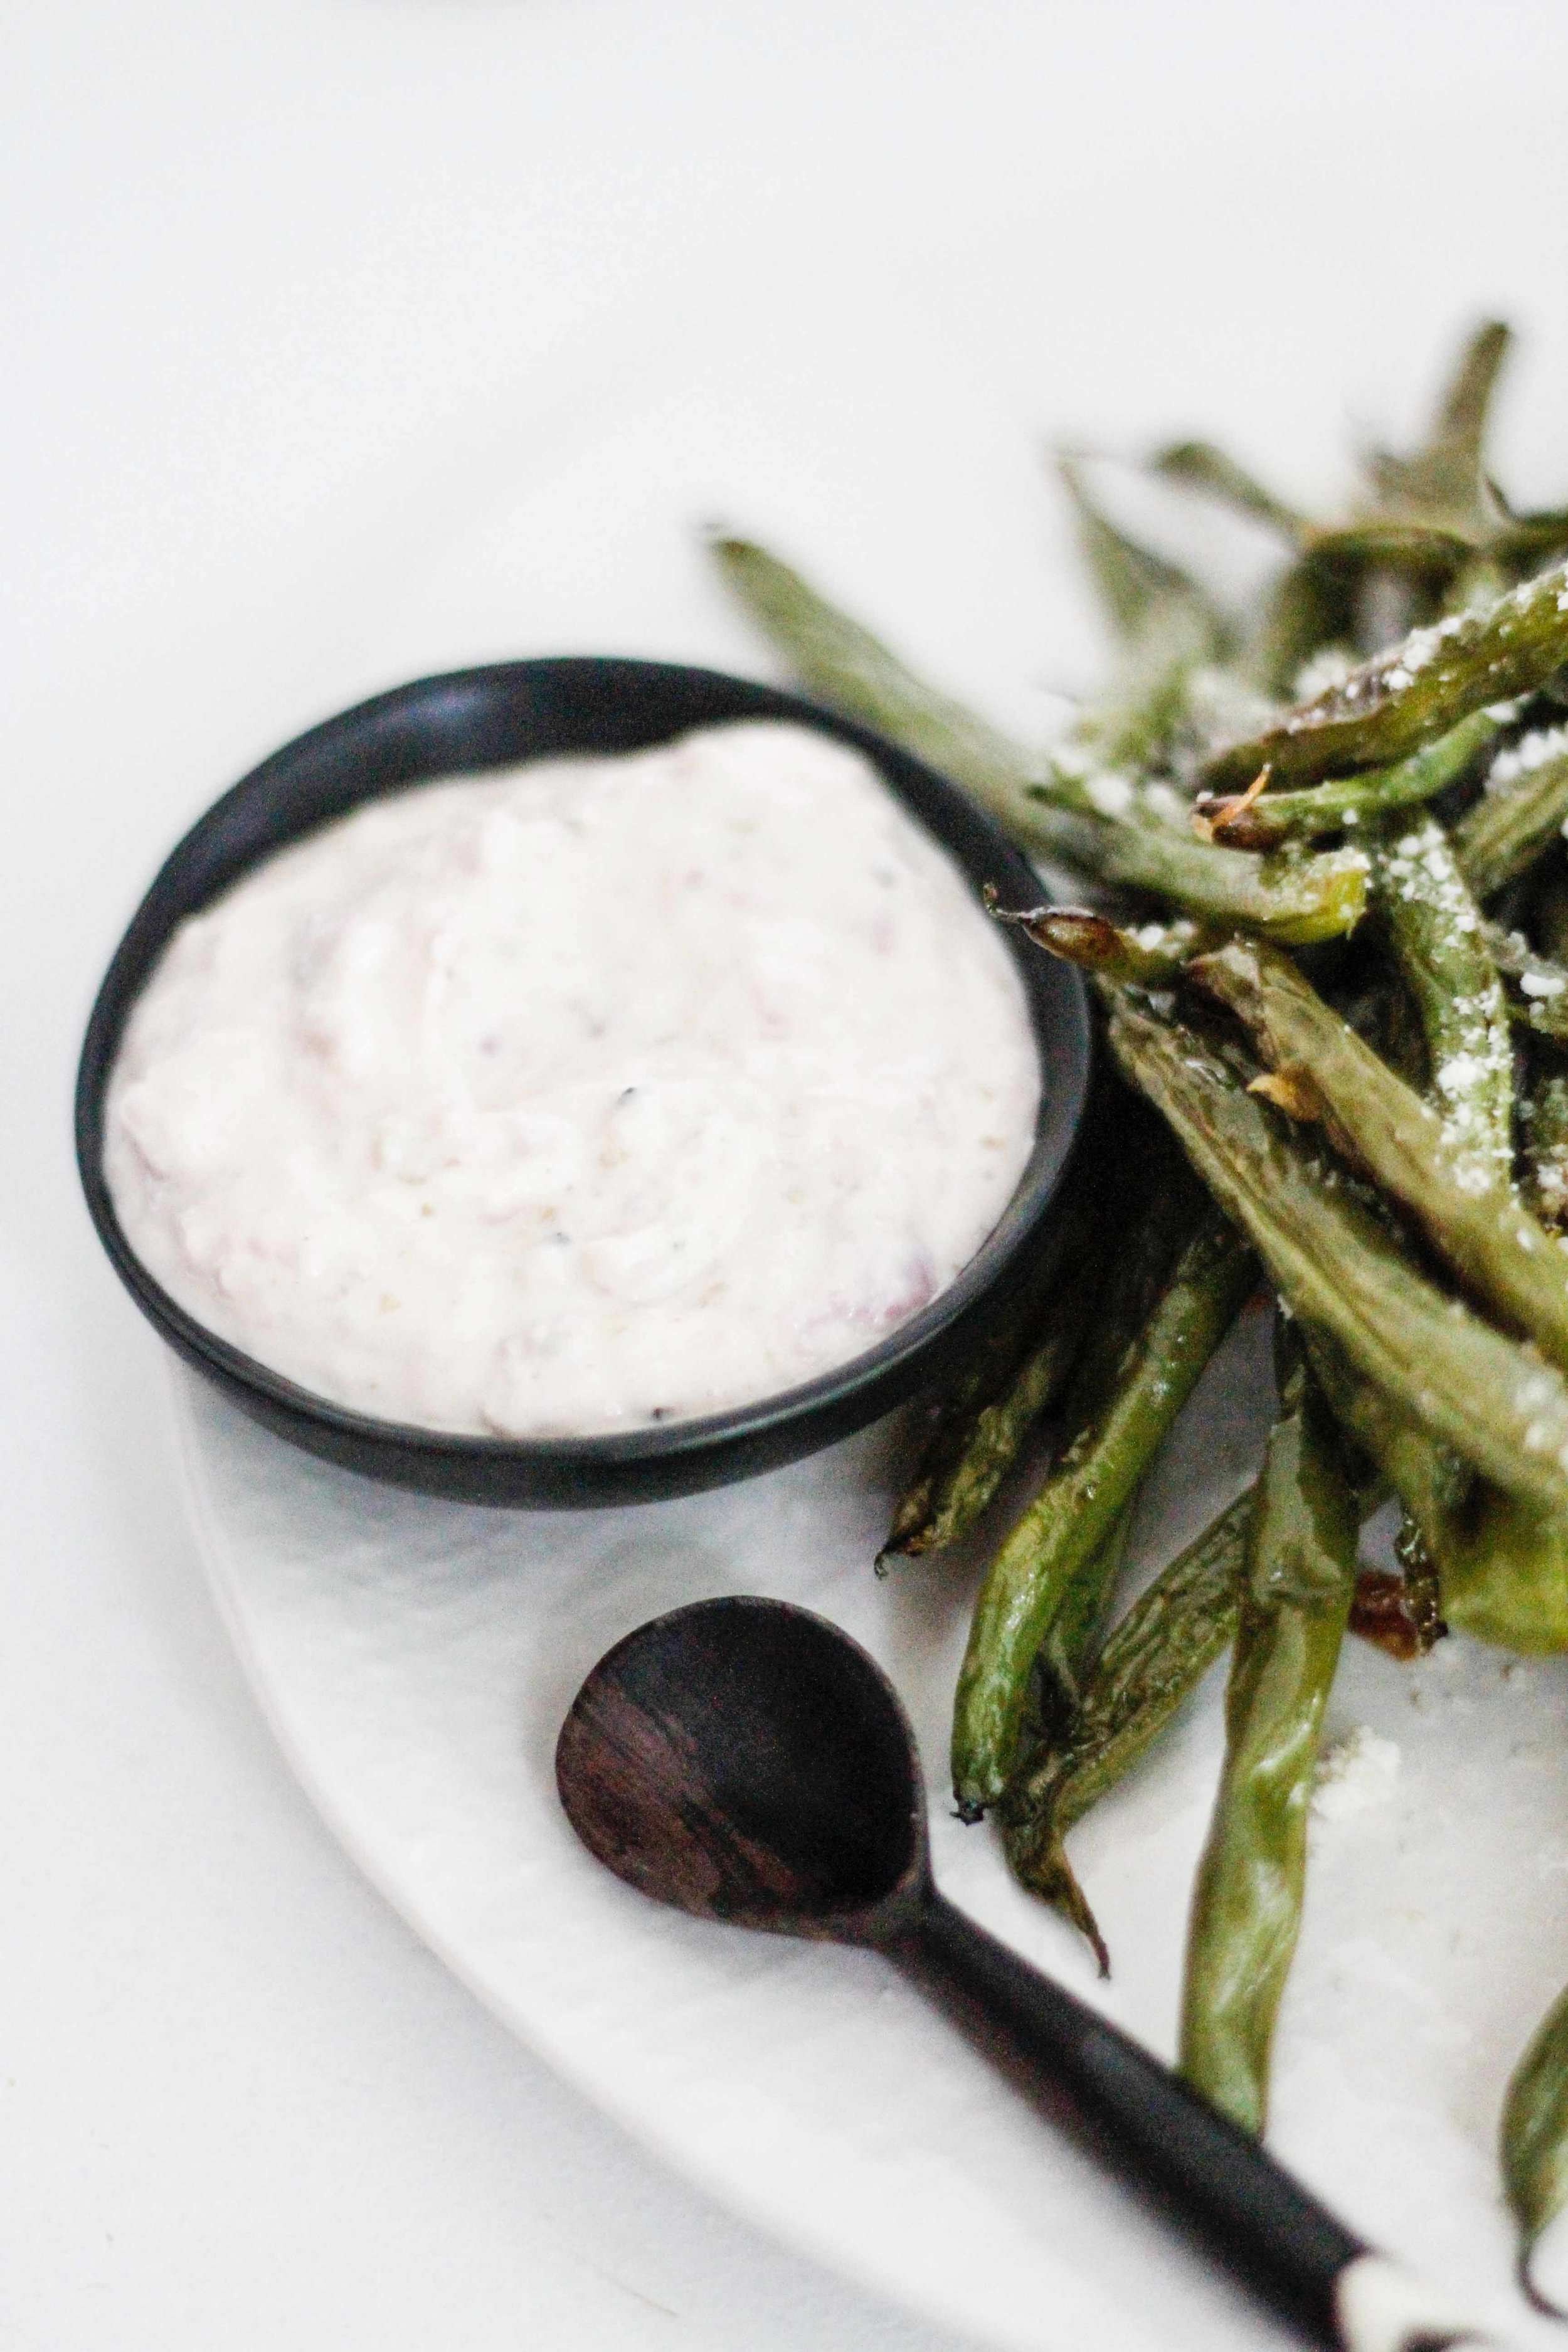 Roasted green beans